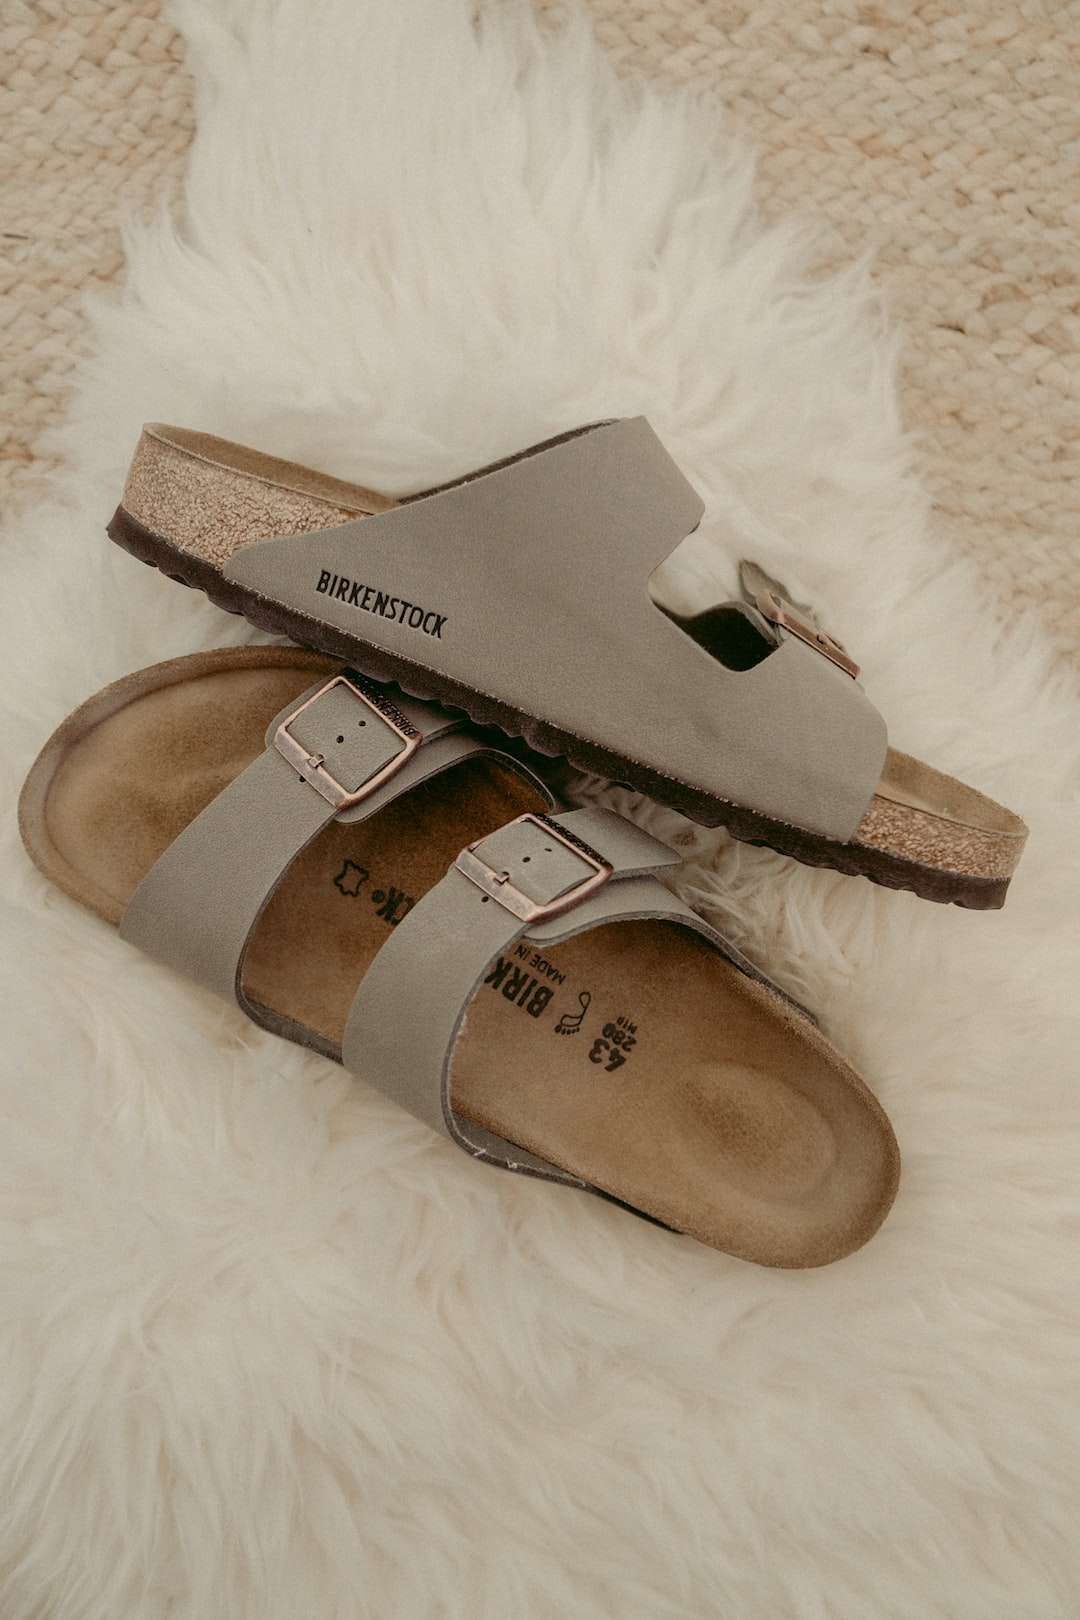 You are currently viewing What Are the Most Popular Birkenstock Styles